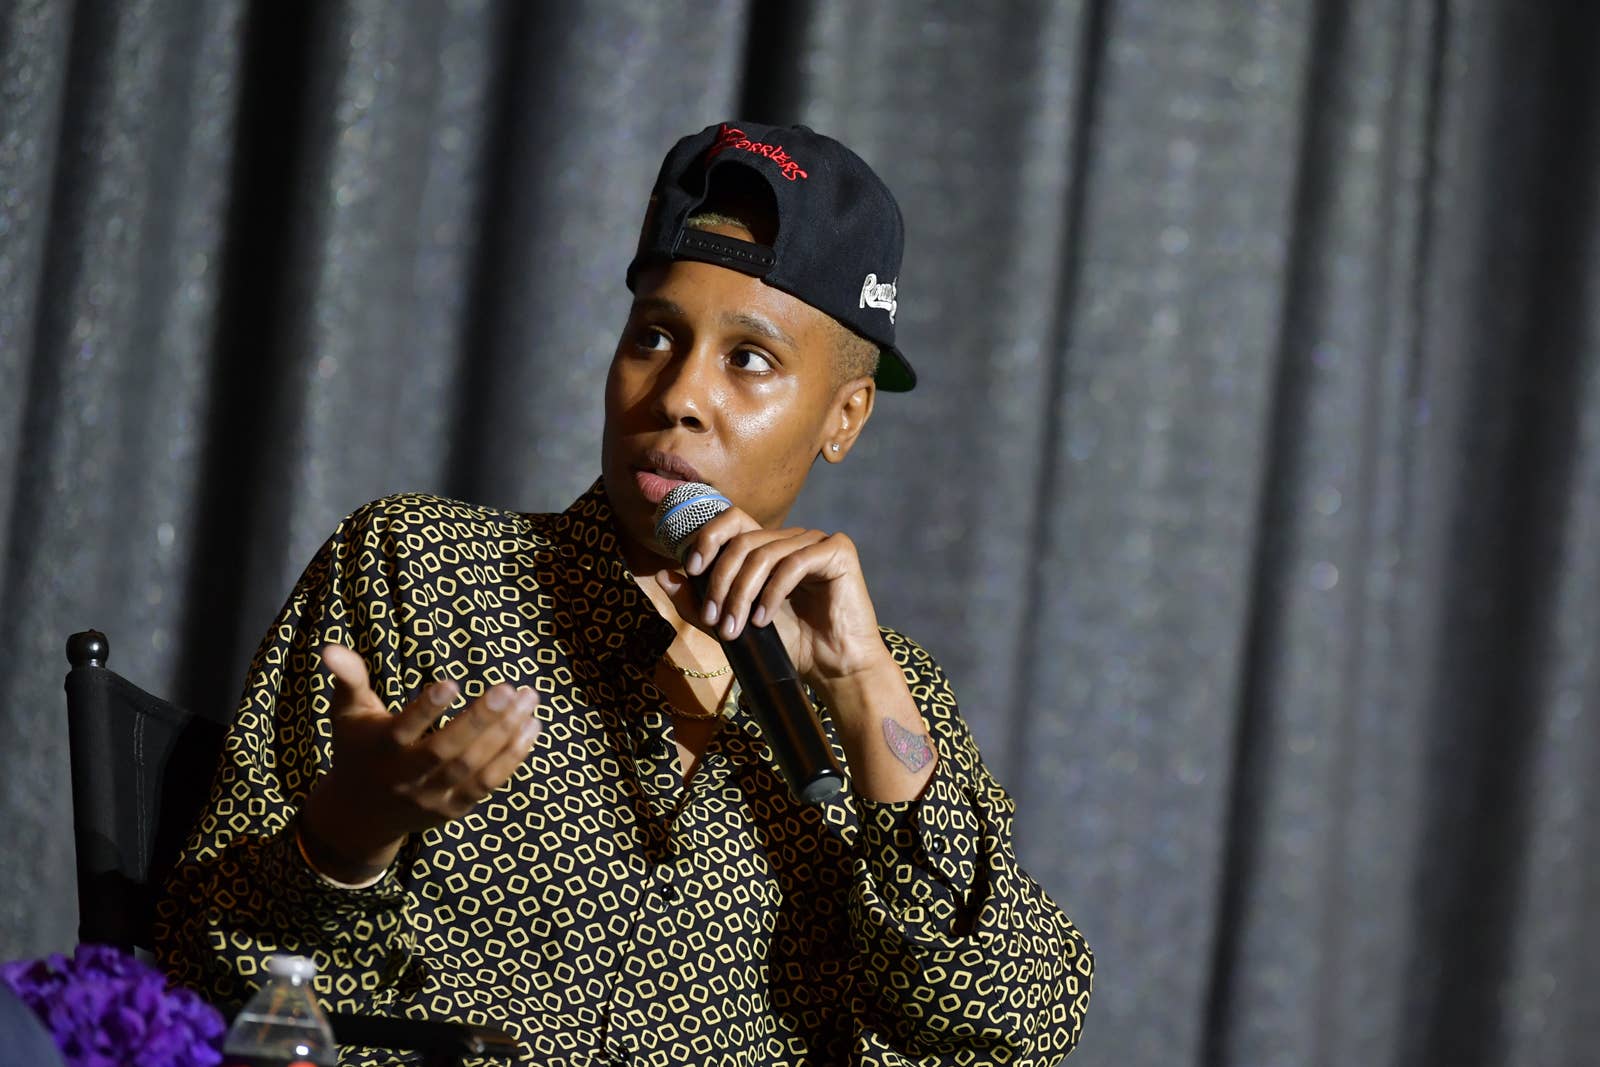 Lena Waithe attend Showtime's "The Chi" For Your Consideration event